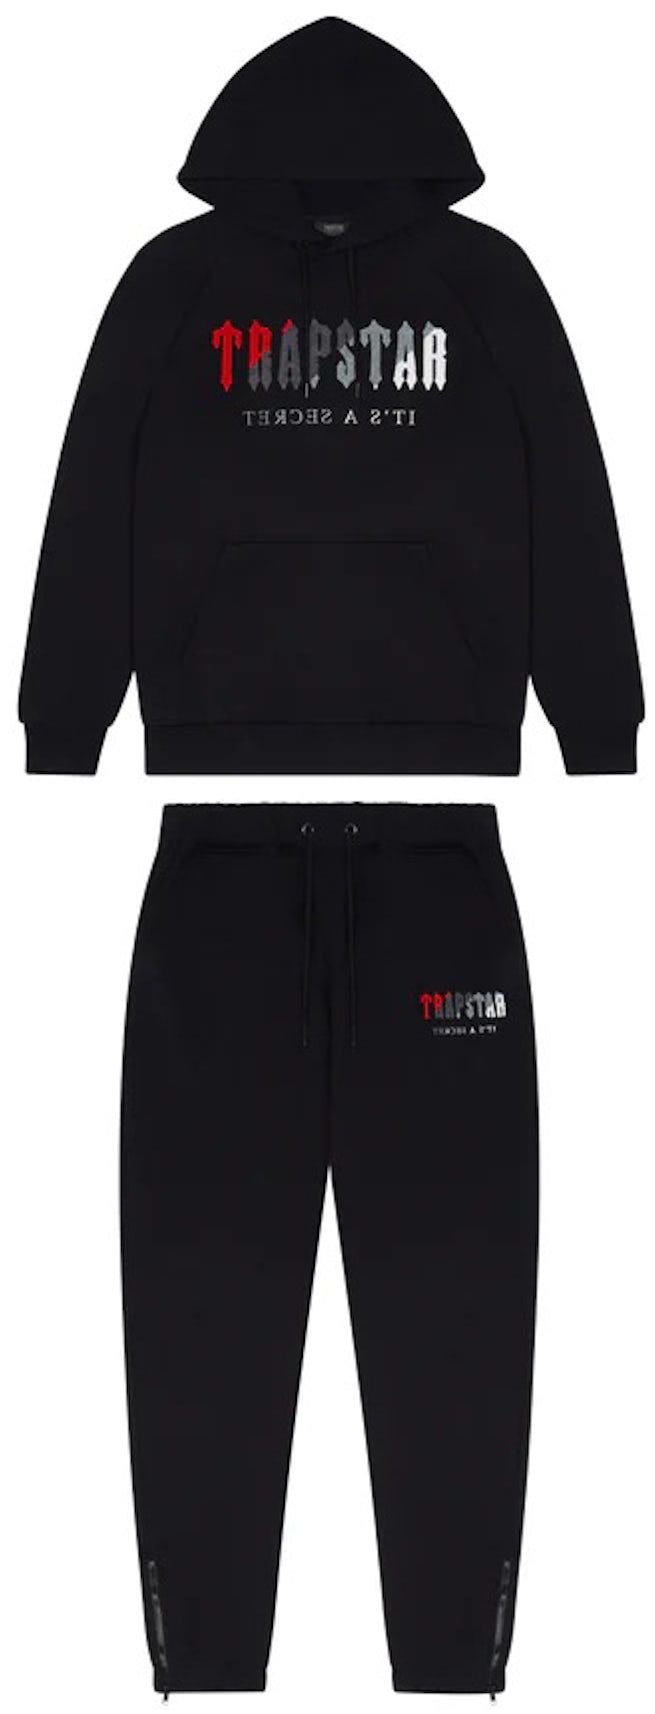 Scorch Hong Kong af Trapstar Chenille Decoded Hoodie Tracksuit Black/Red - FW22 Men's - US